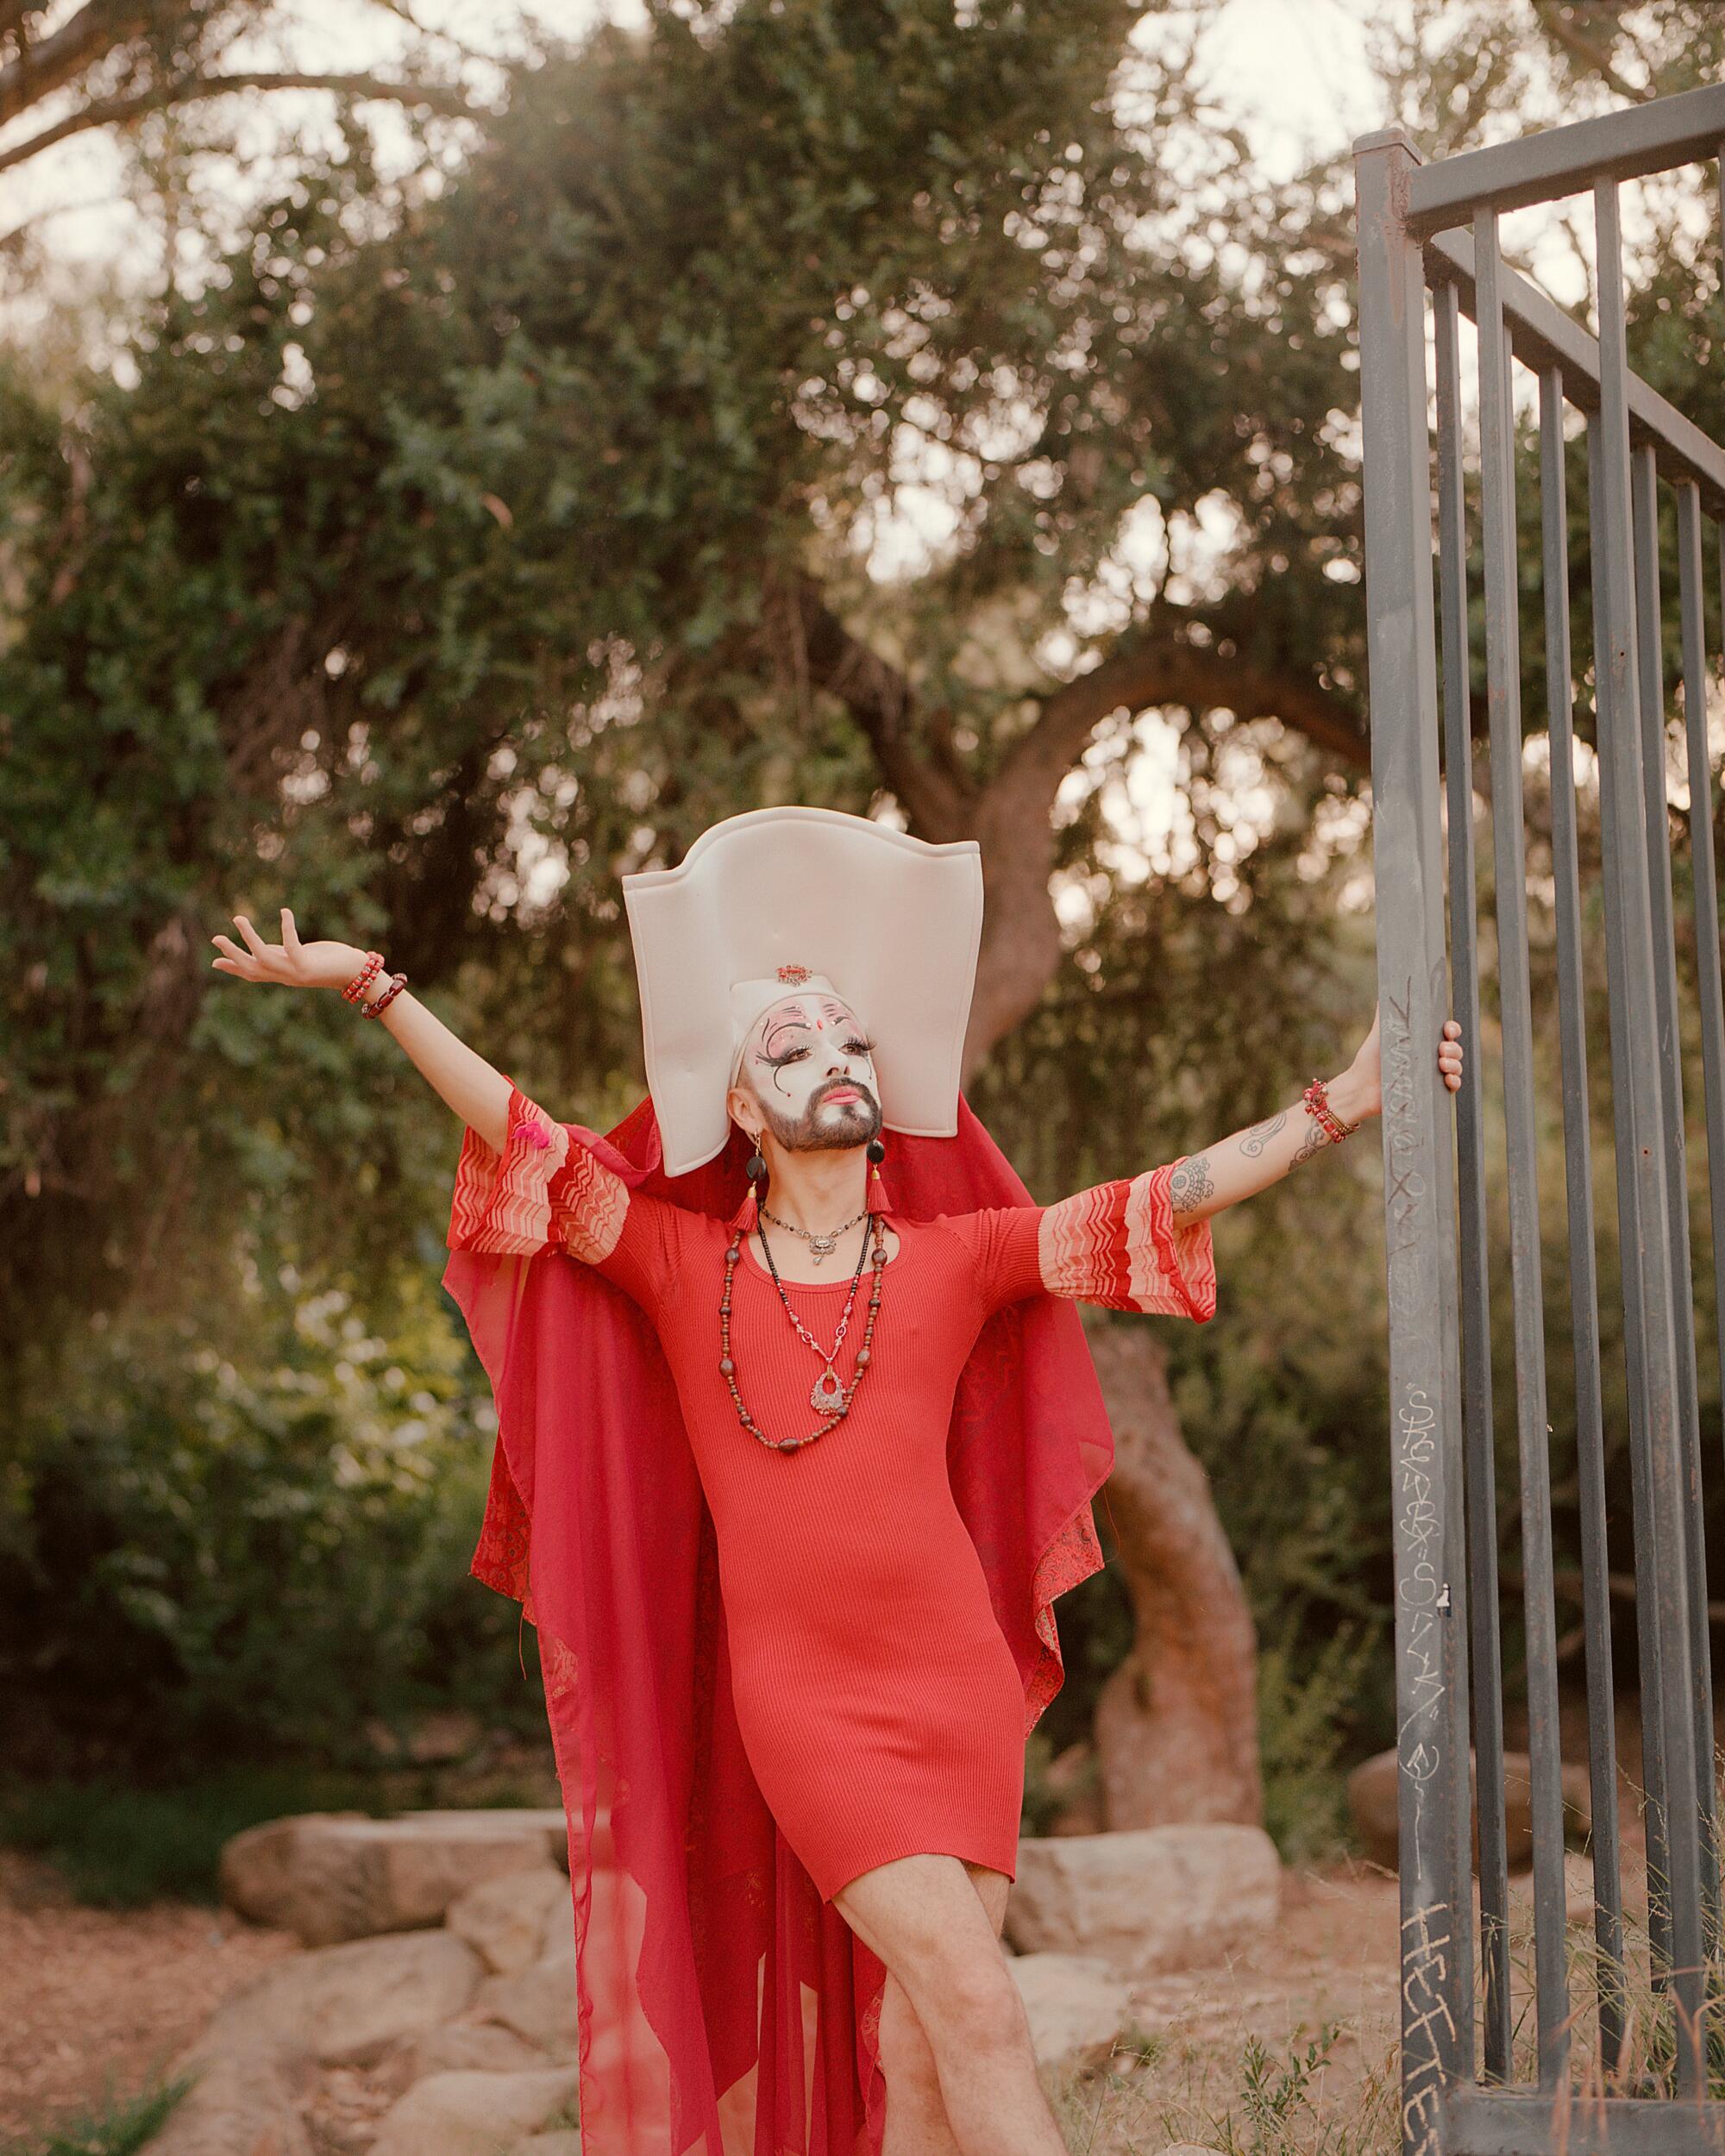 A drag queen in a red dress, beard, face paint and ornate wimpole headdress strikes a pose outdoors.